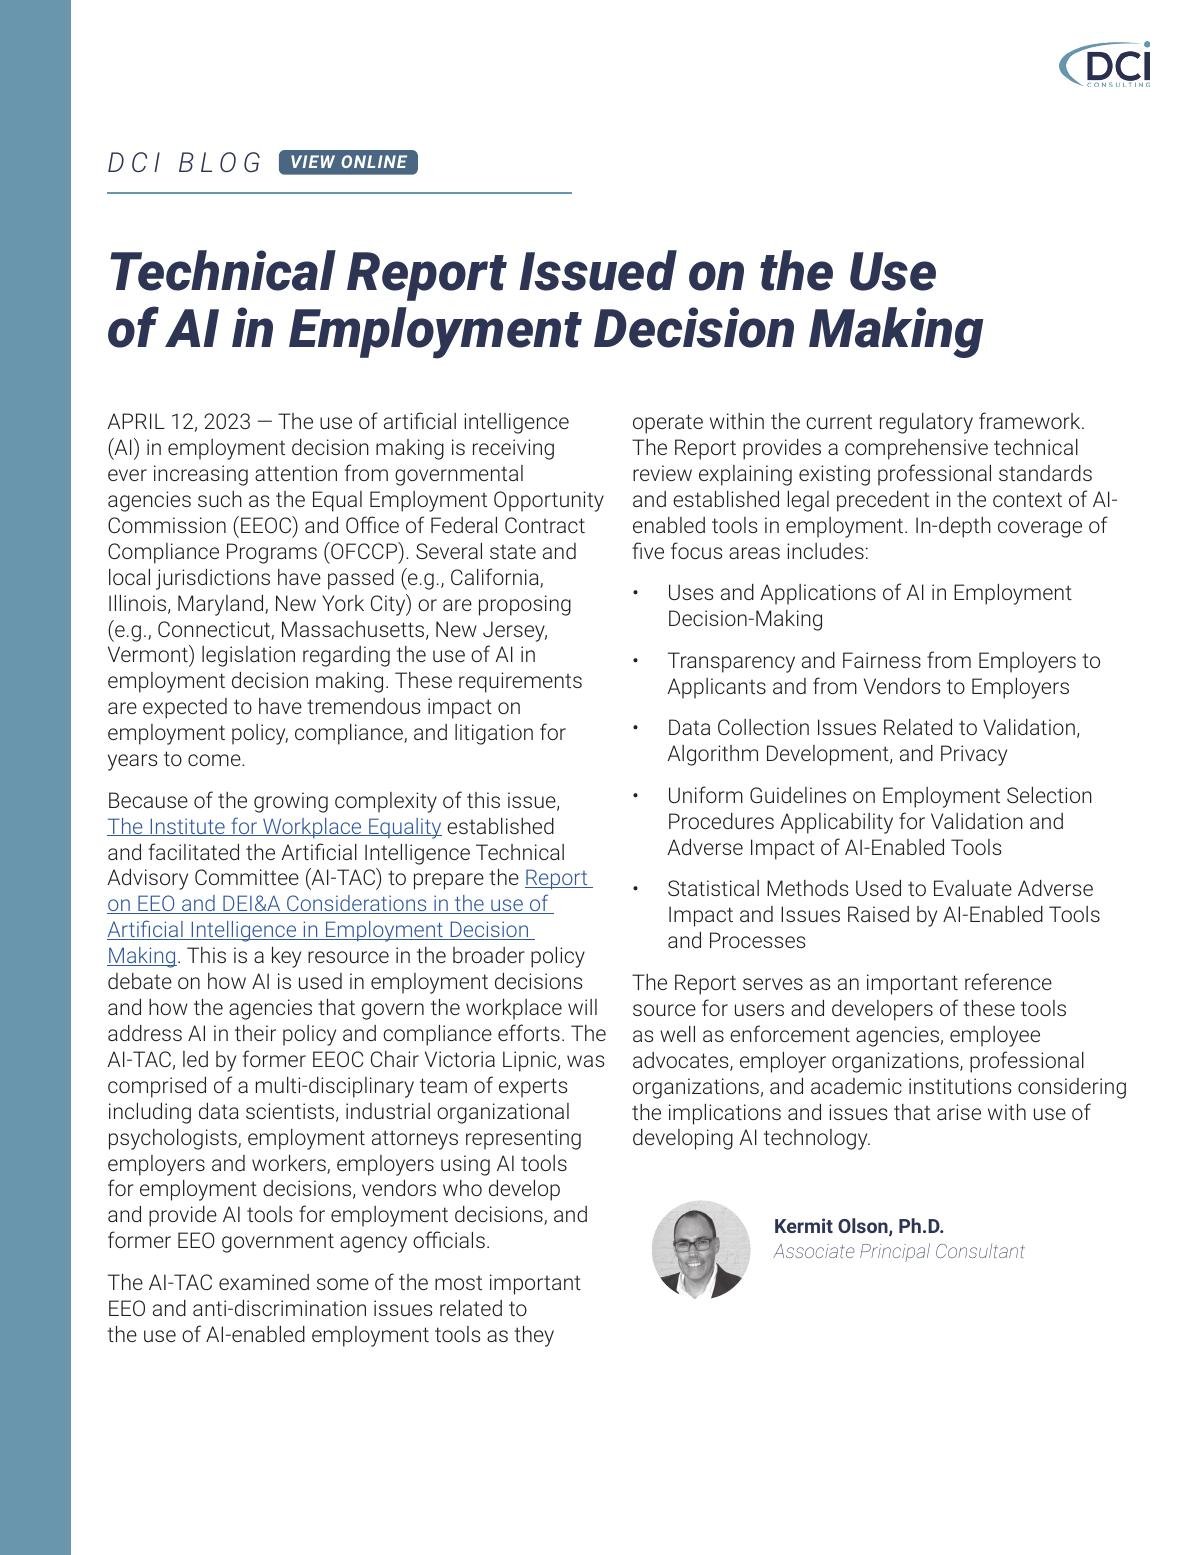 Technical Report Issued on the Use of AI in Employment Decision Making